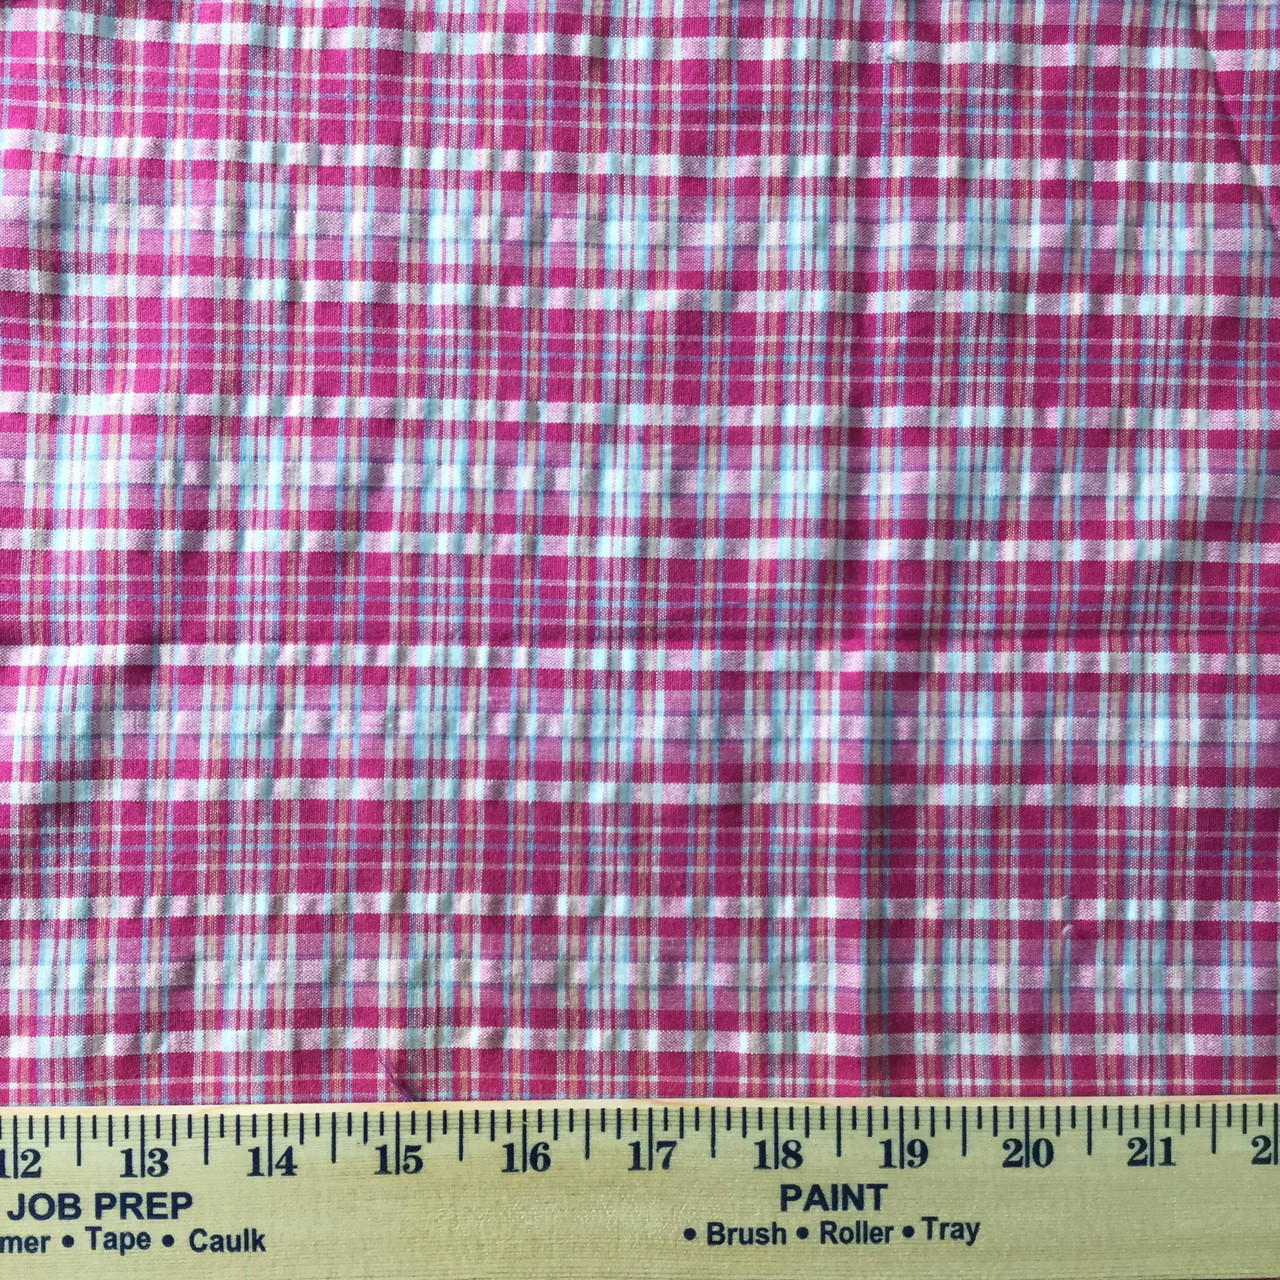 Hot Pink Plaid Fabric | Poly-Cotton Blend | Apparel Blouse Skirts ...